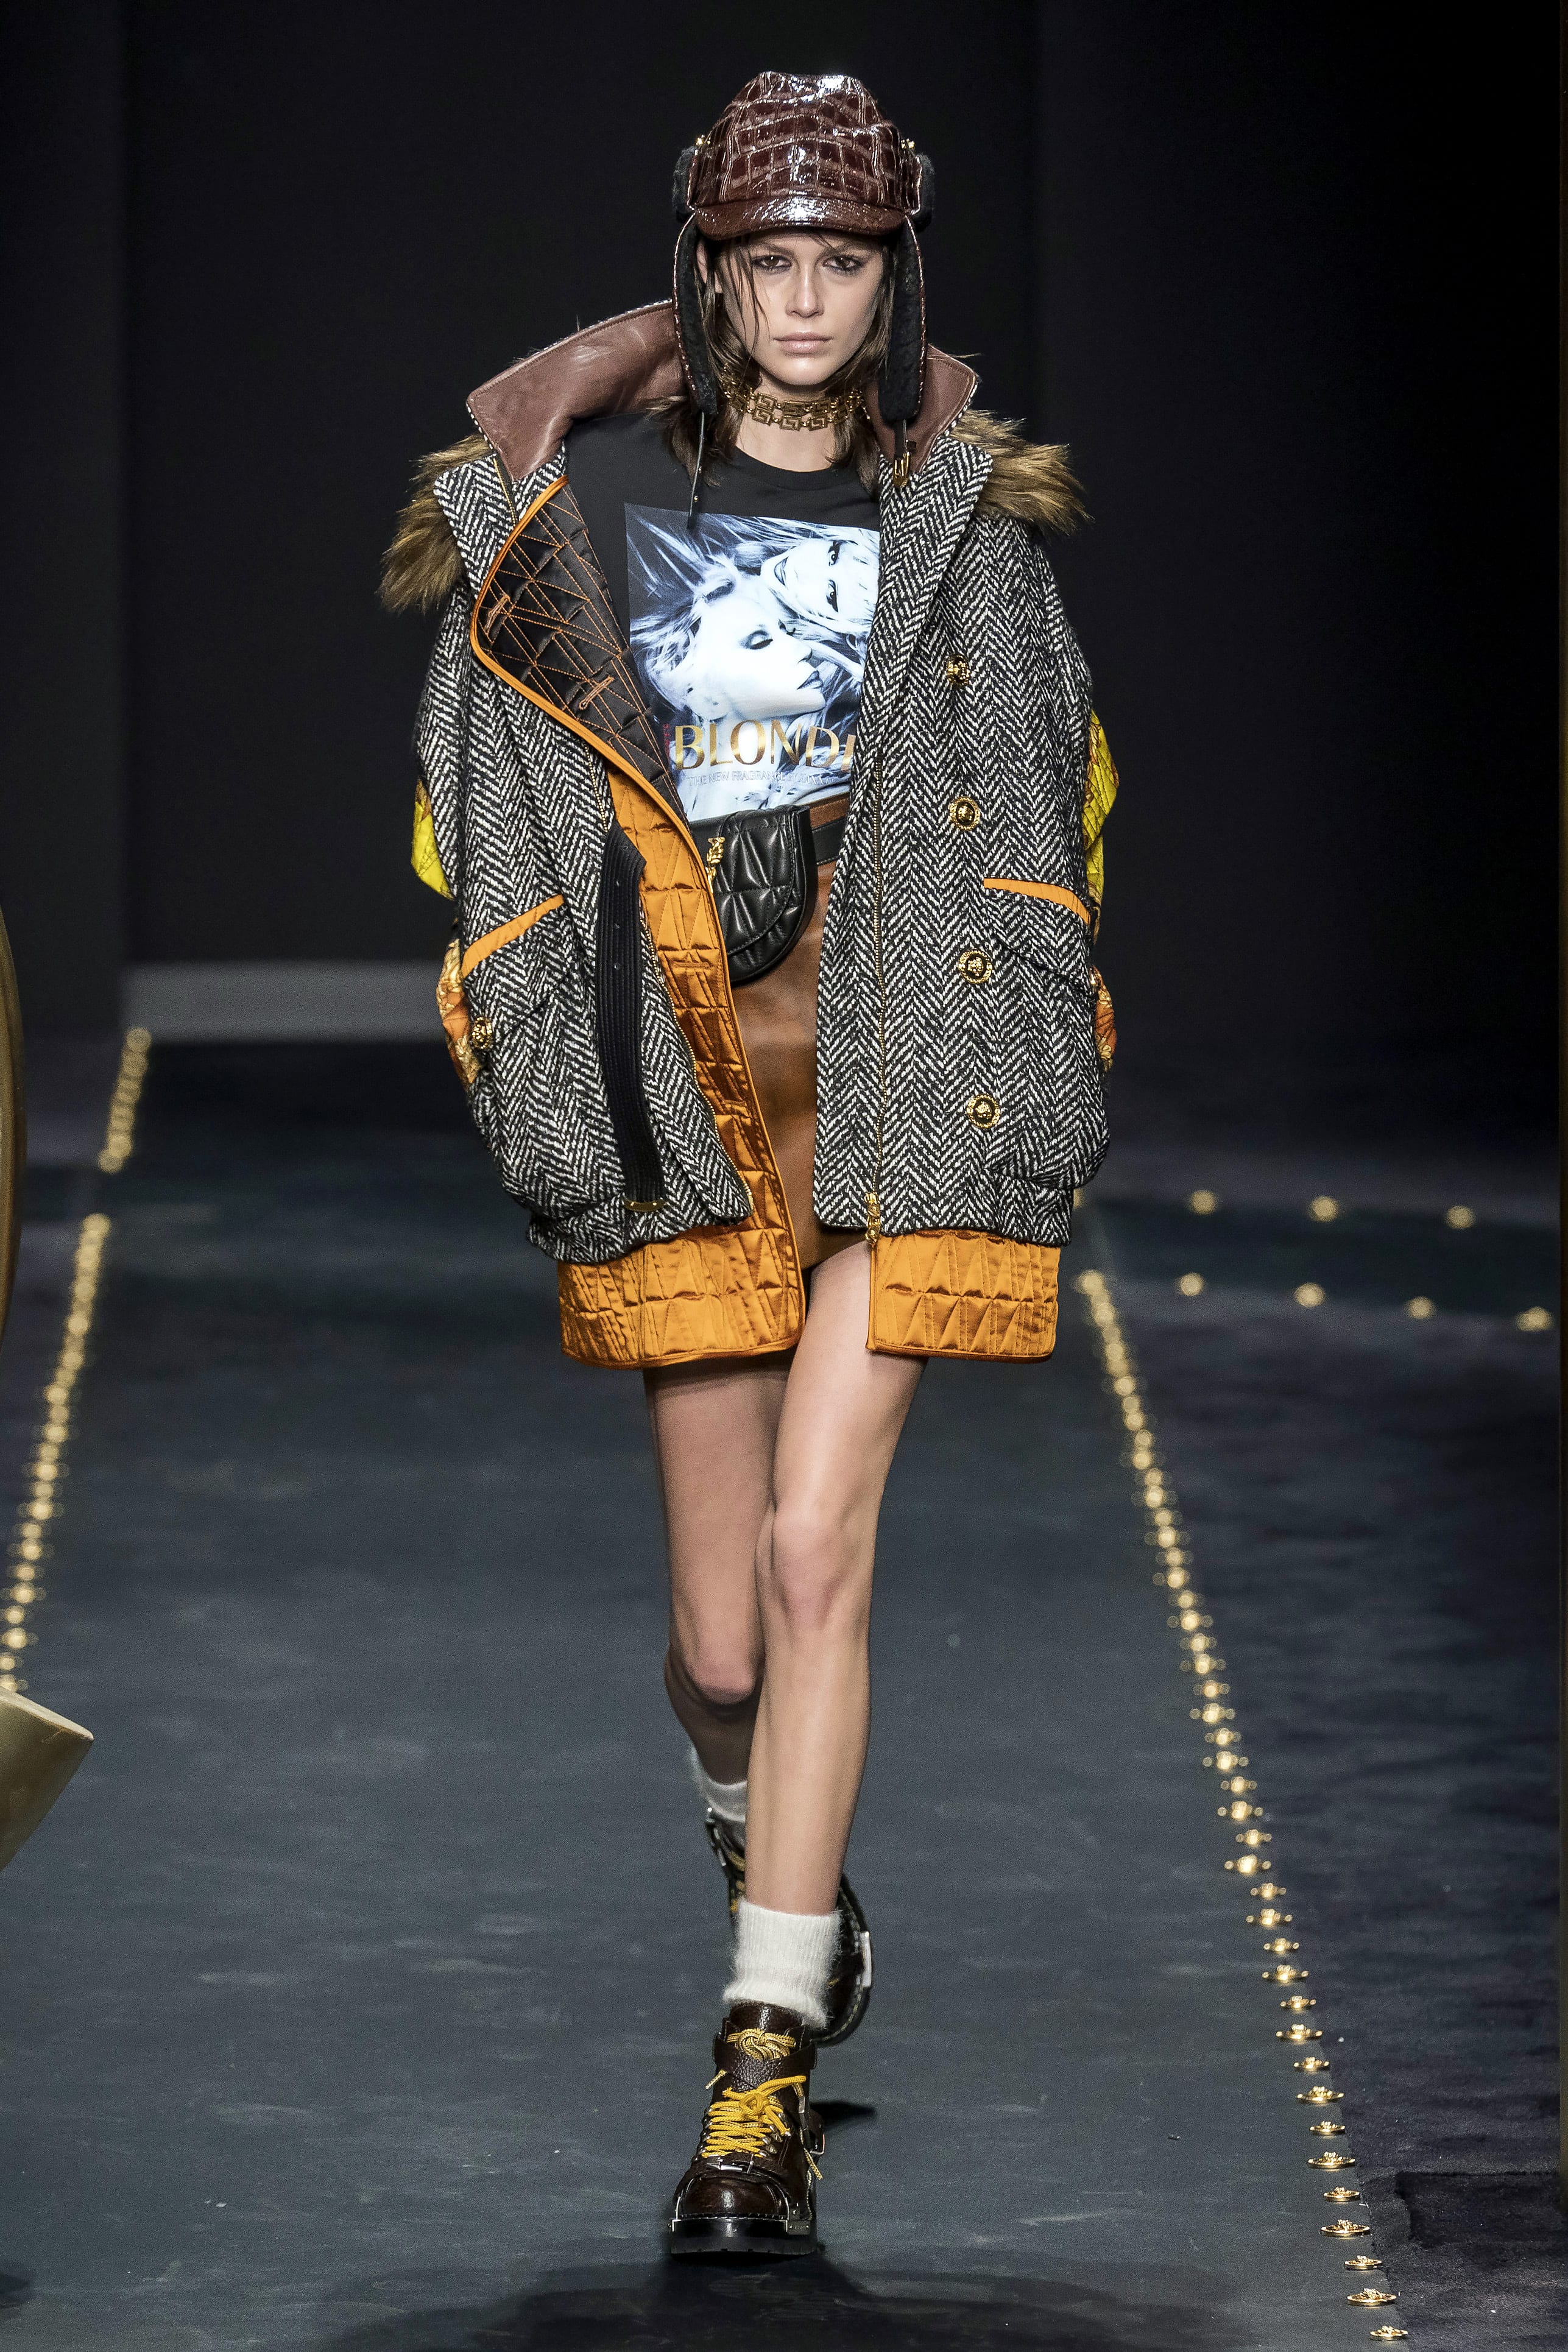 Milan Fashion Week Fall 2019: The Top Trends, Themes & Fashion Moods ...